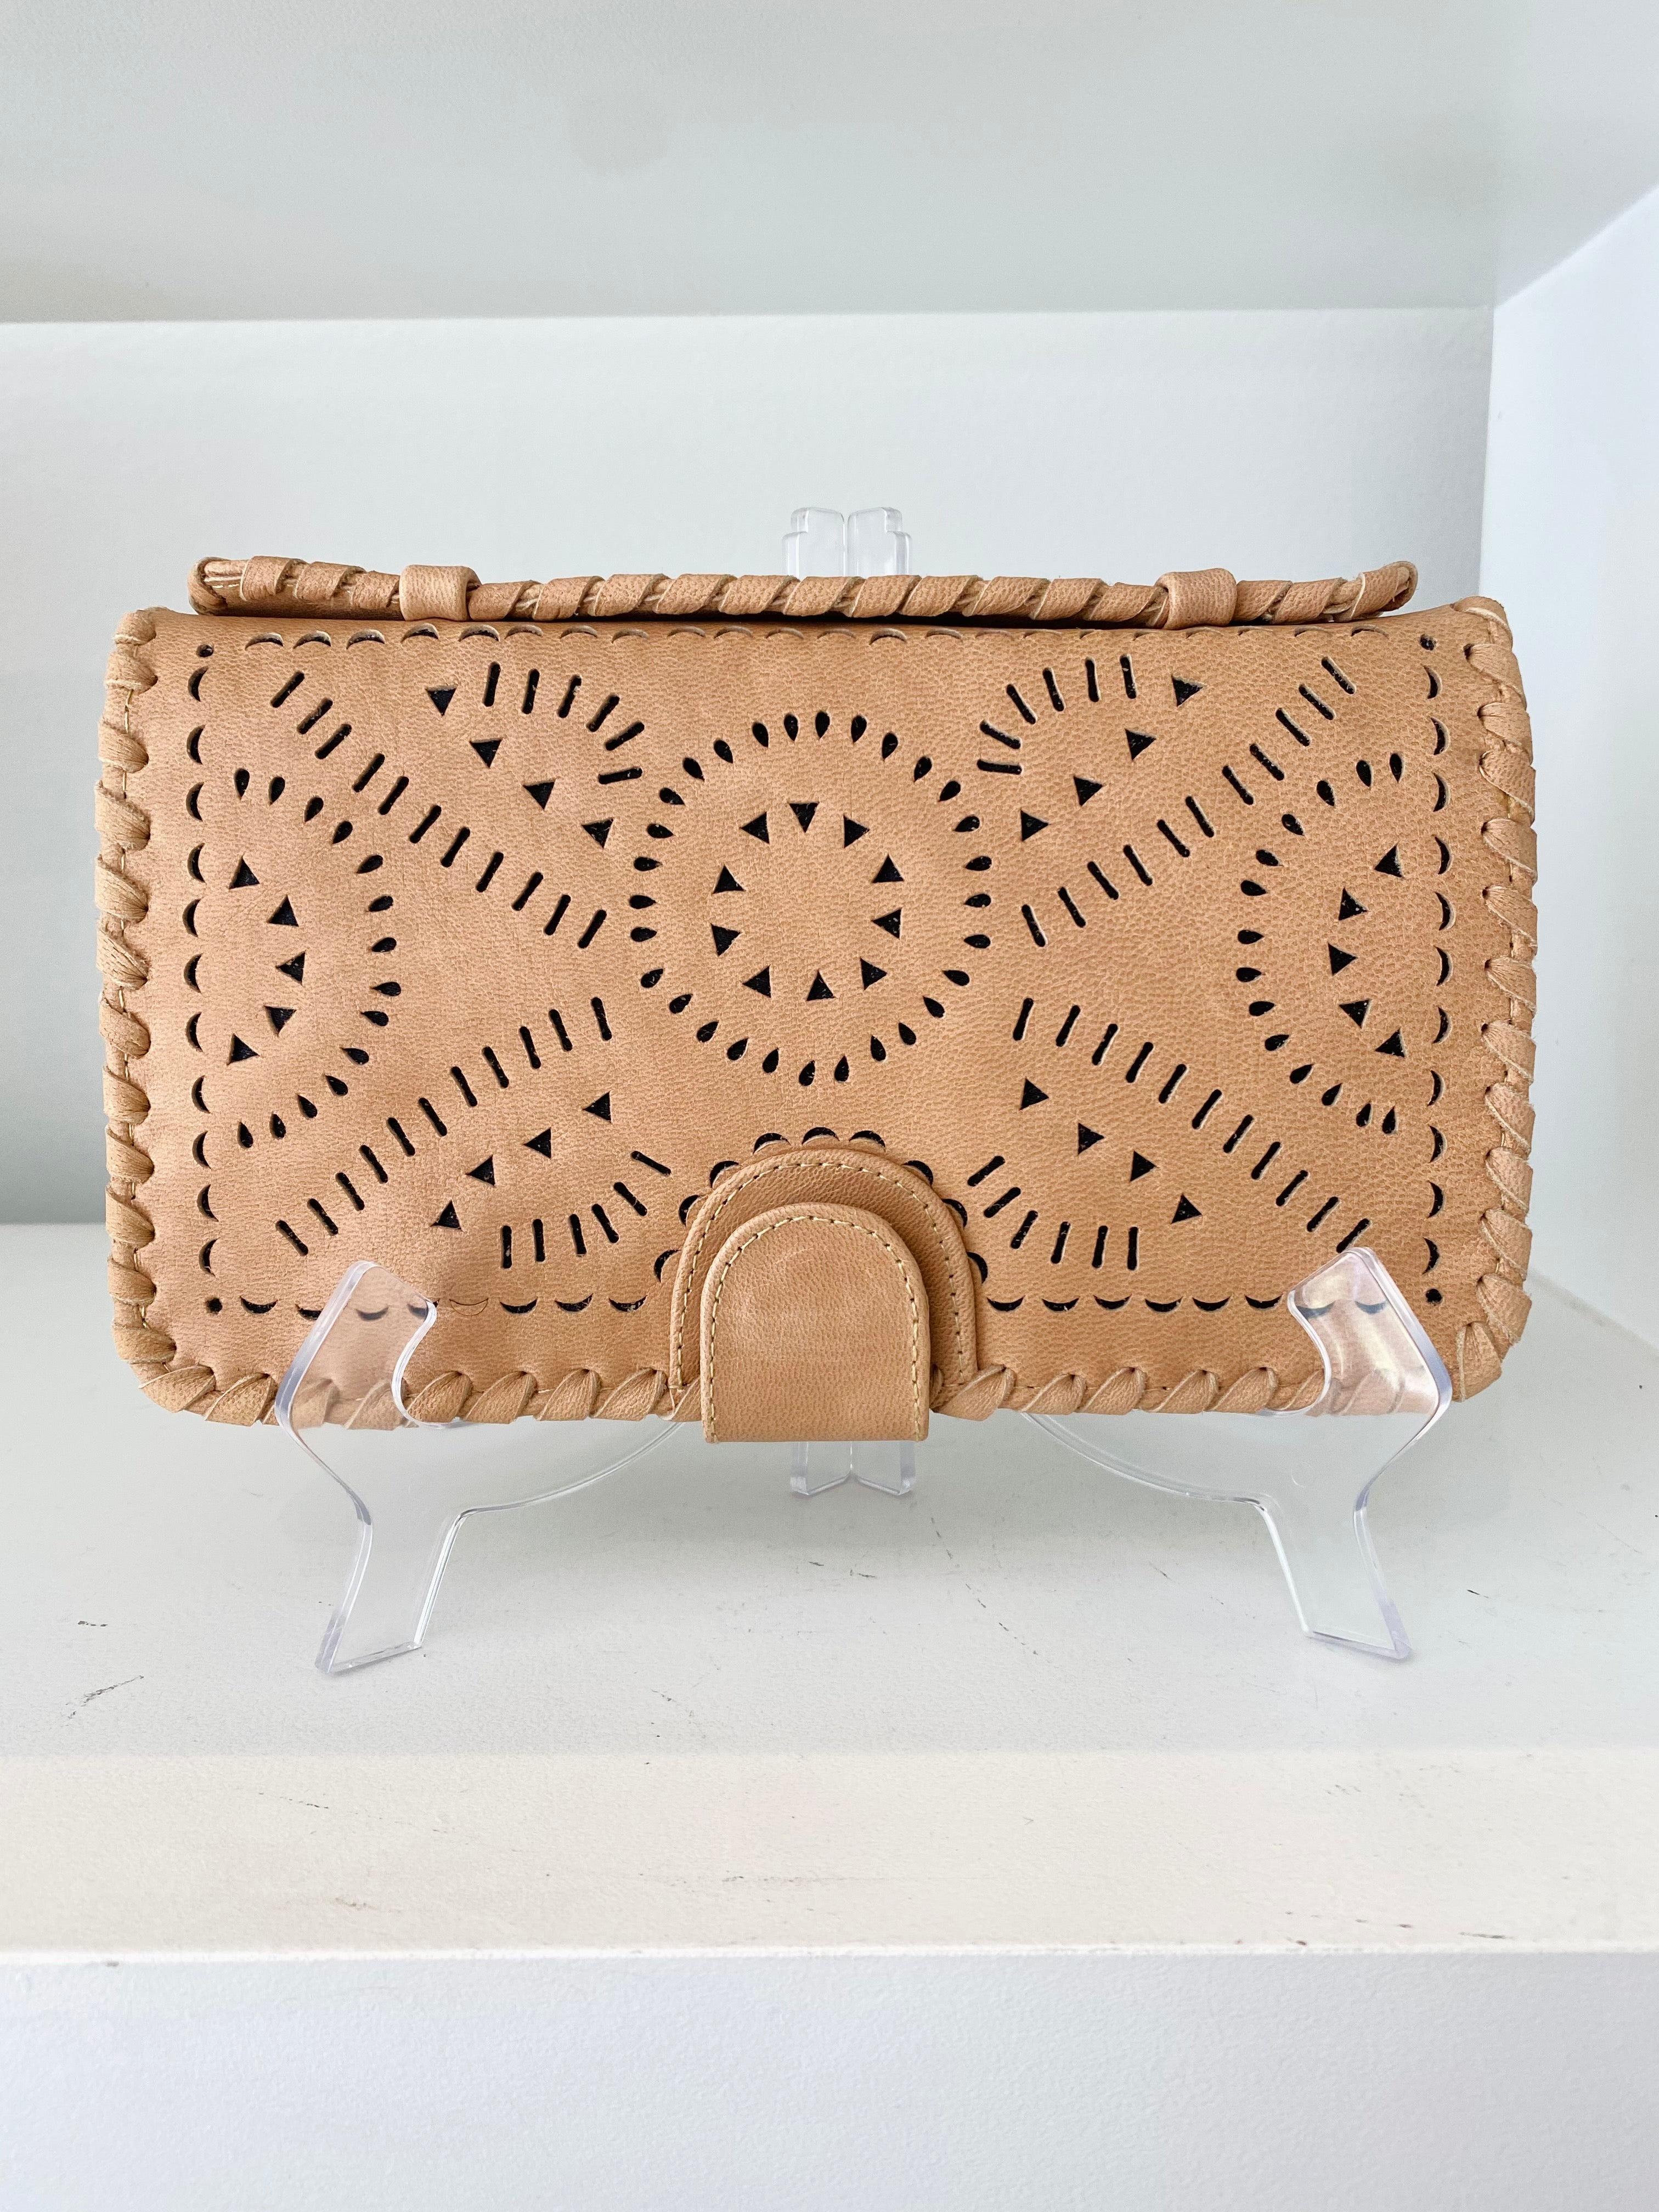 Moccasin Mexicana Clutch